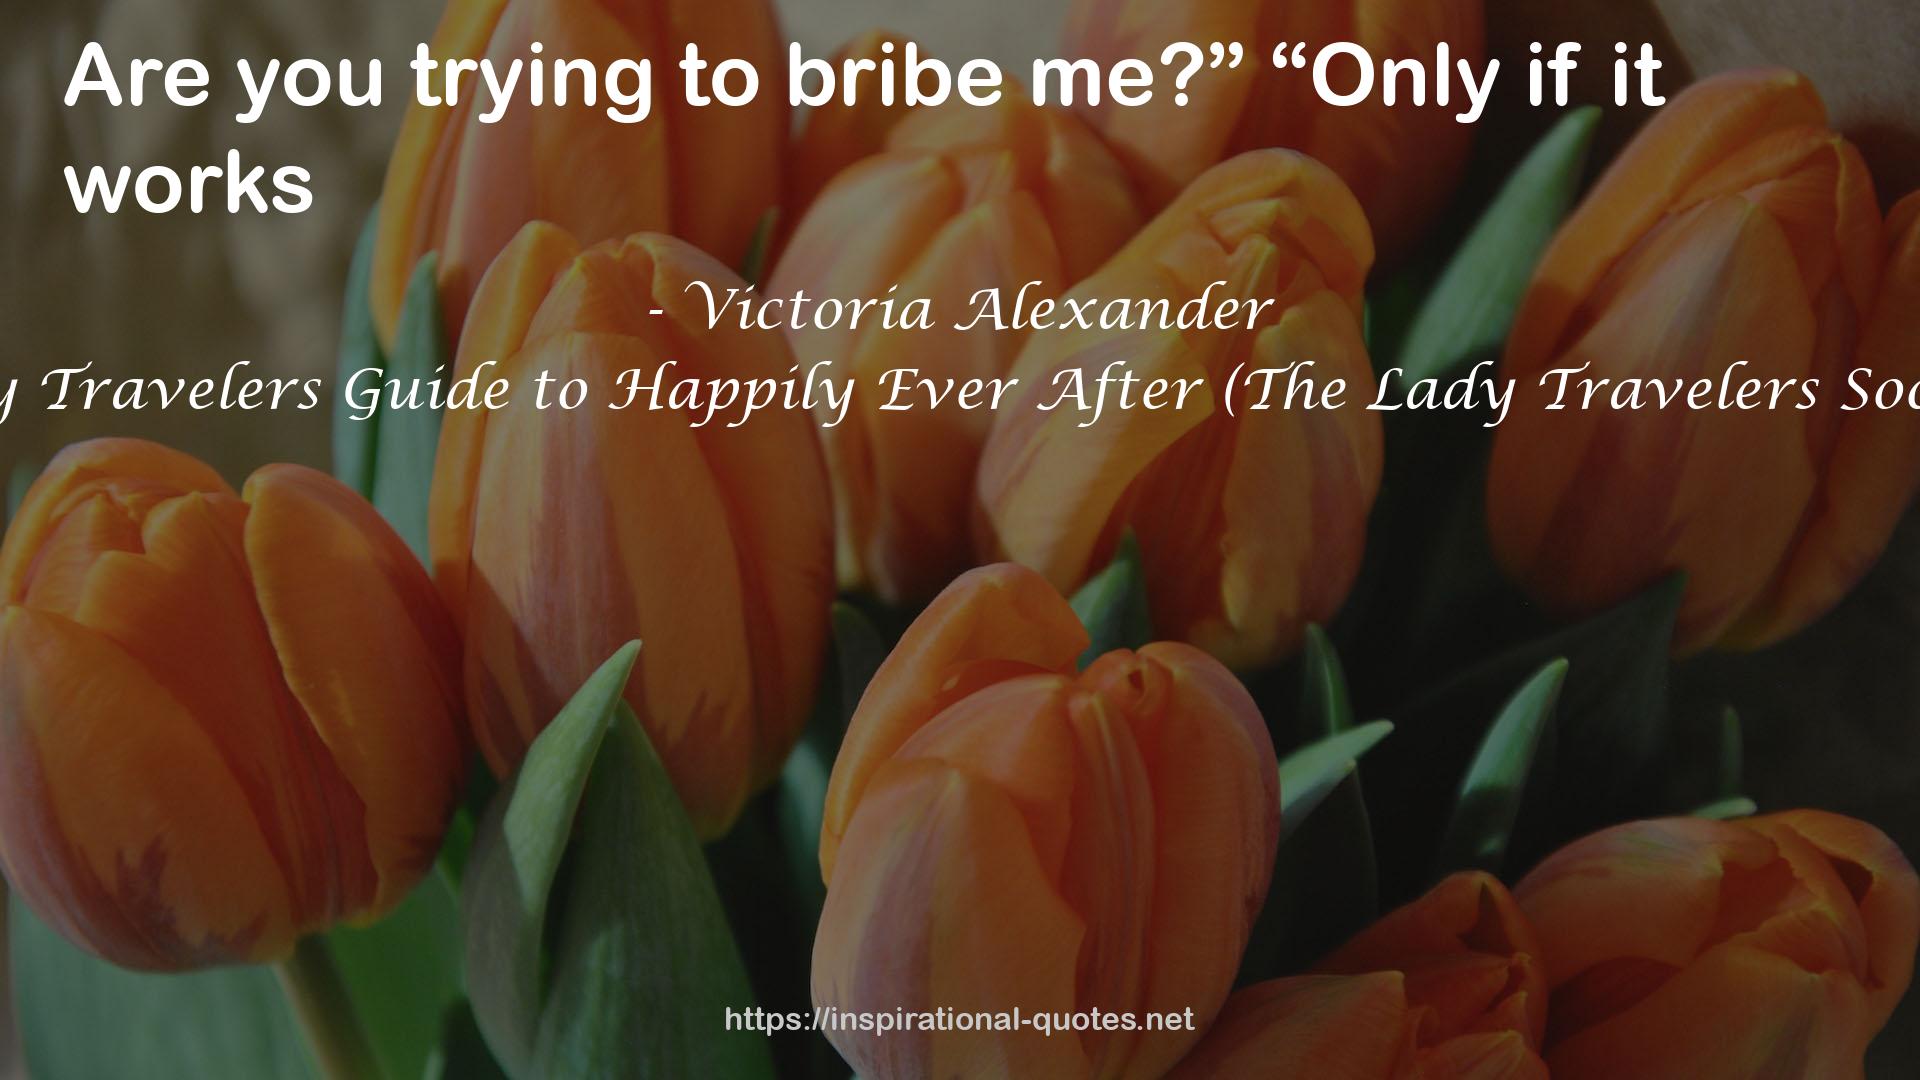 The Lady Travelers Guide to Happily Ever After (The Lady Travelers Society, #4) QUOTES